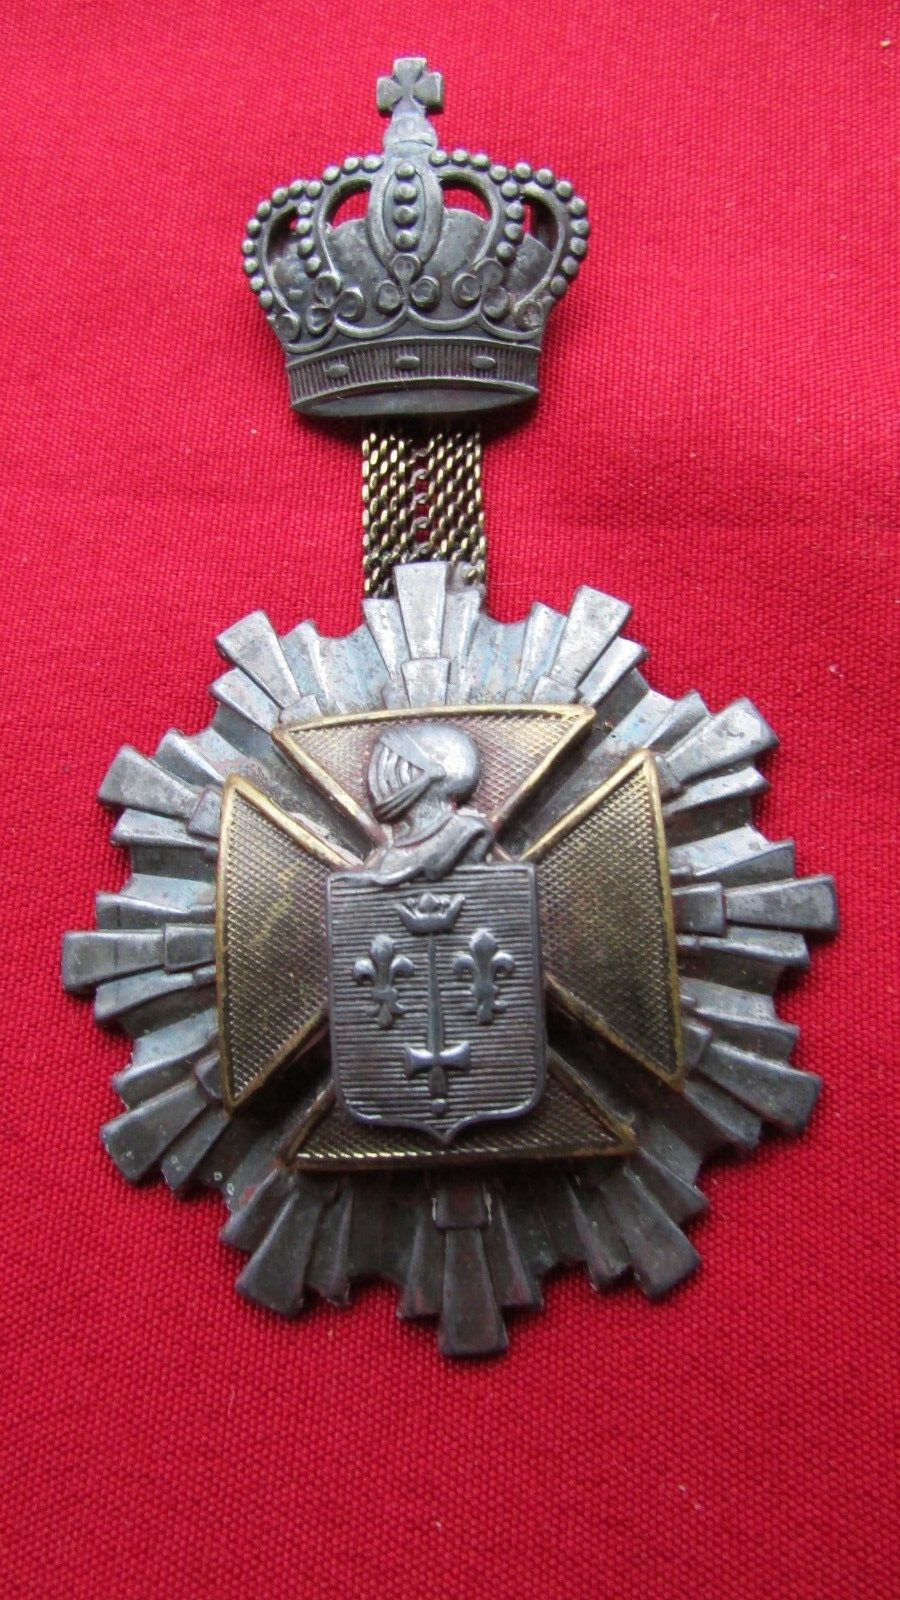 Rare Old German Empire Kingdom Army Royal Order Medal Cross & Knight Gold Chain